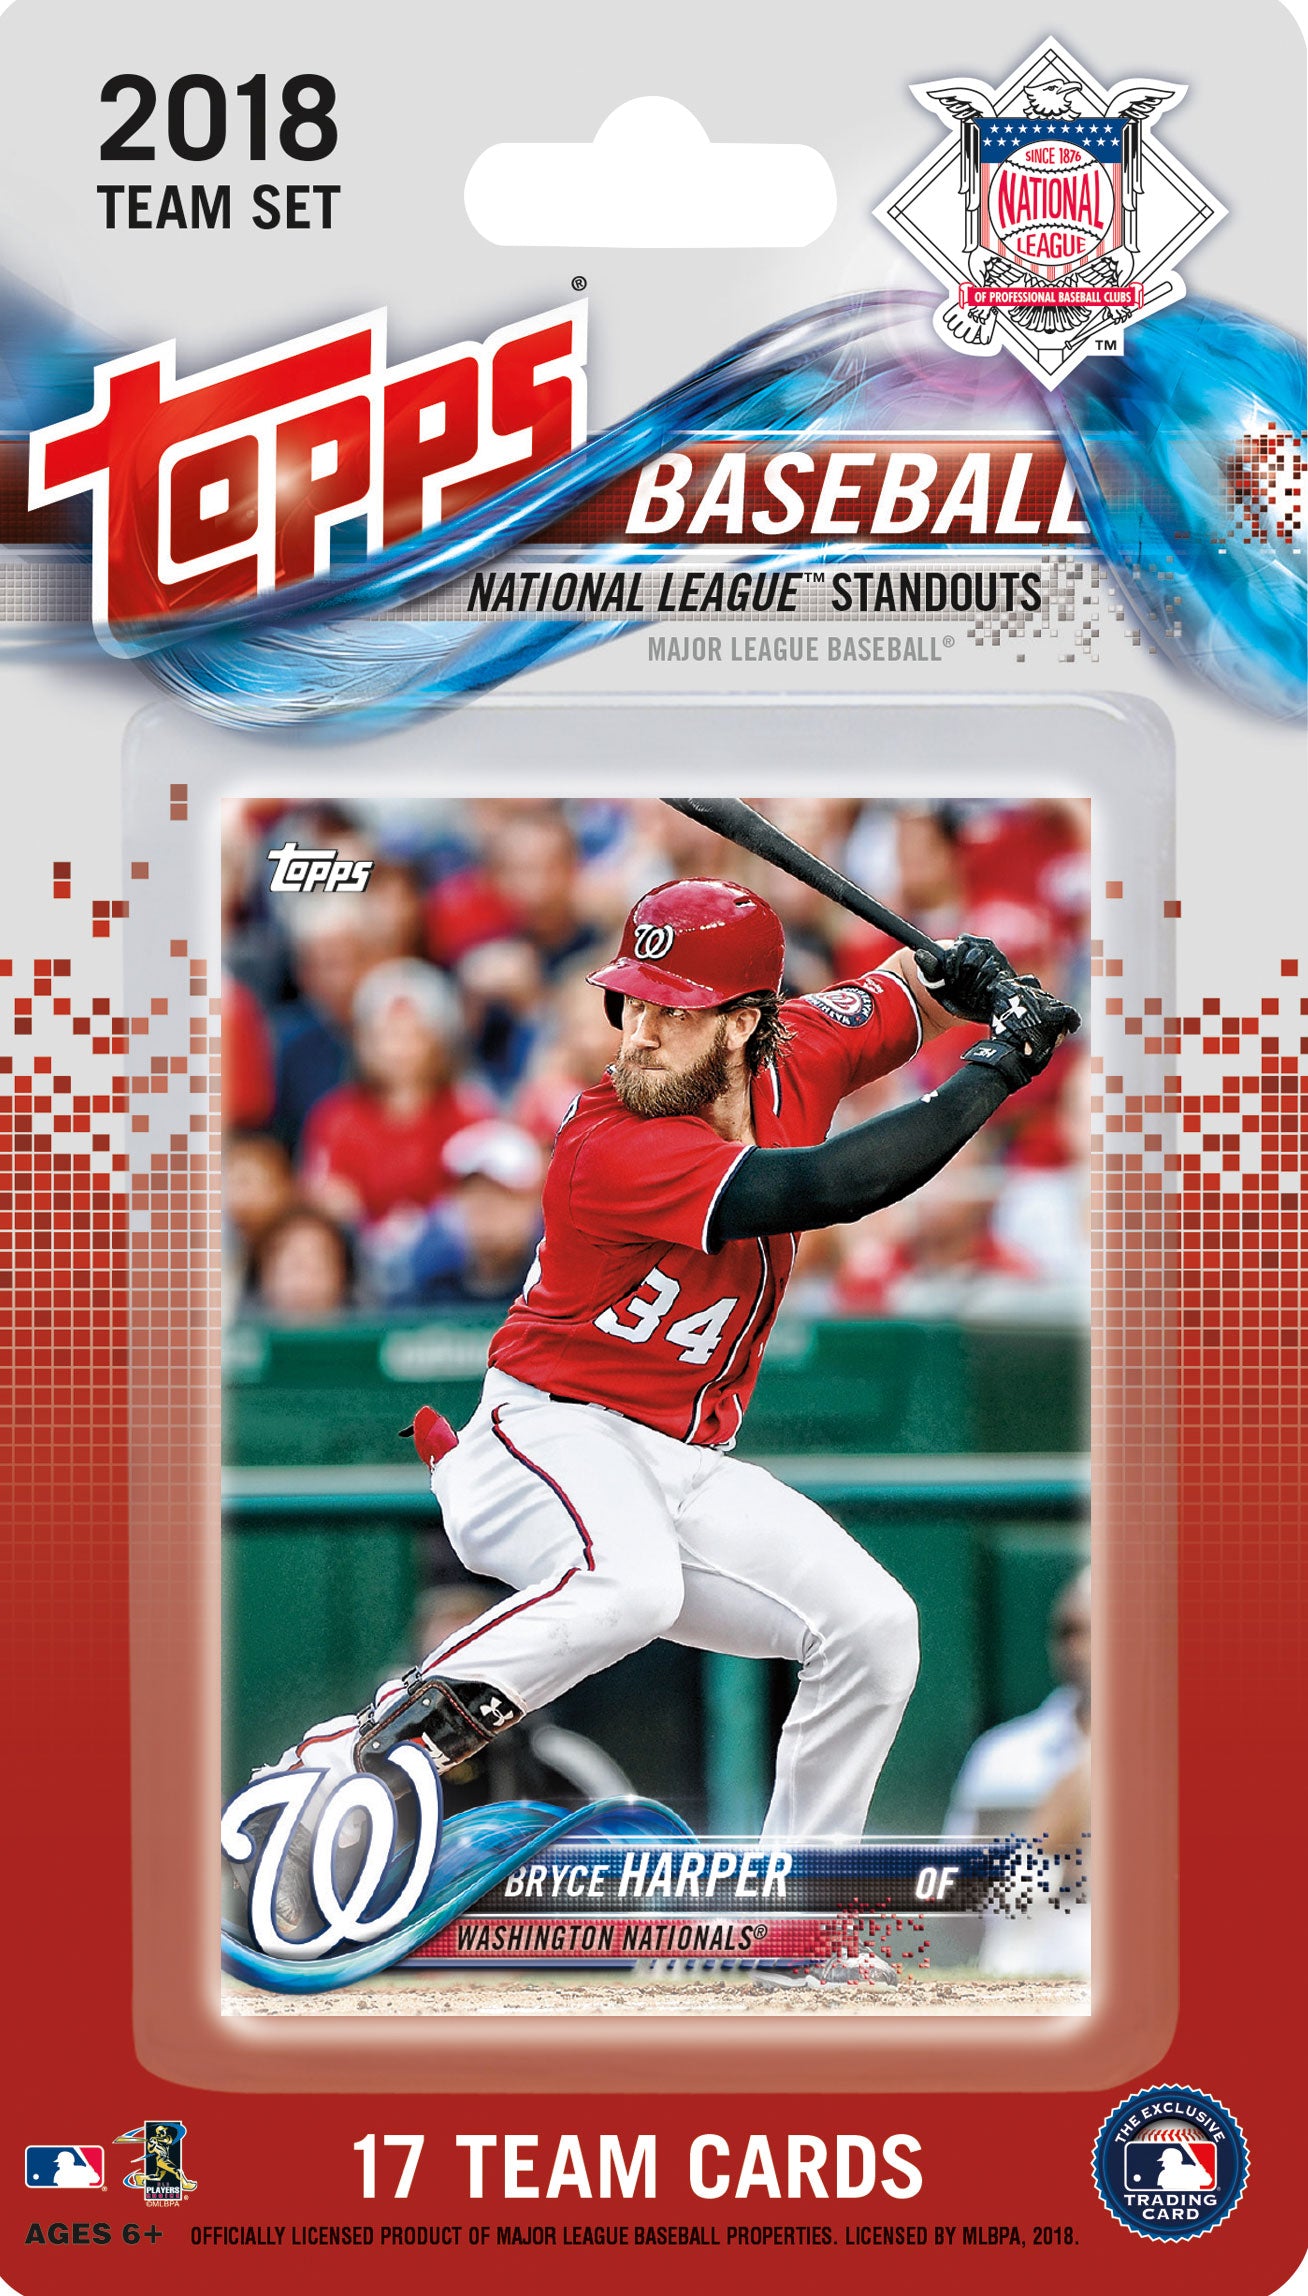 St. Louis Cardinals 2014 Topps OPENING DAY Team Set with Yadier